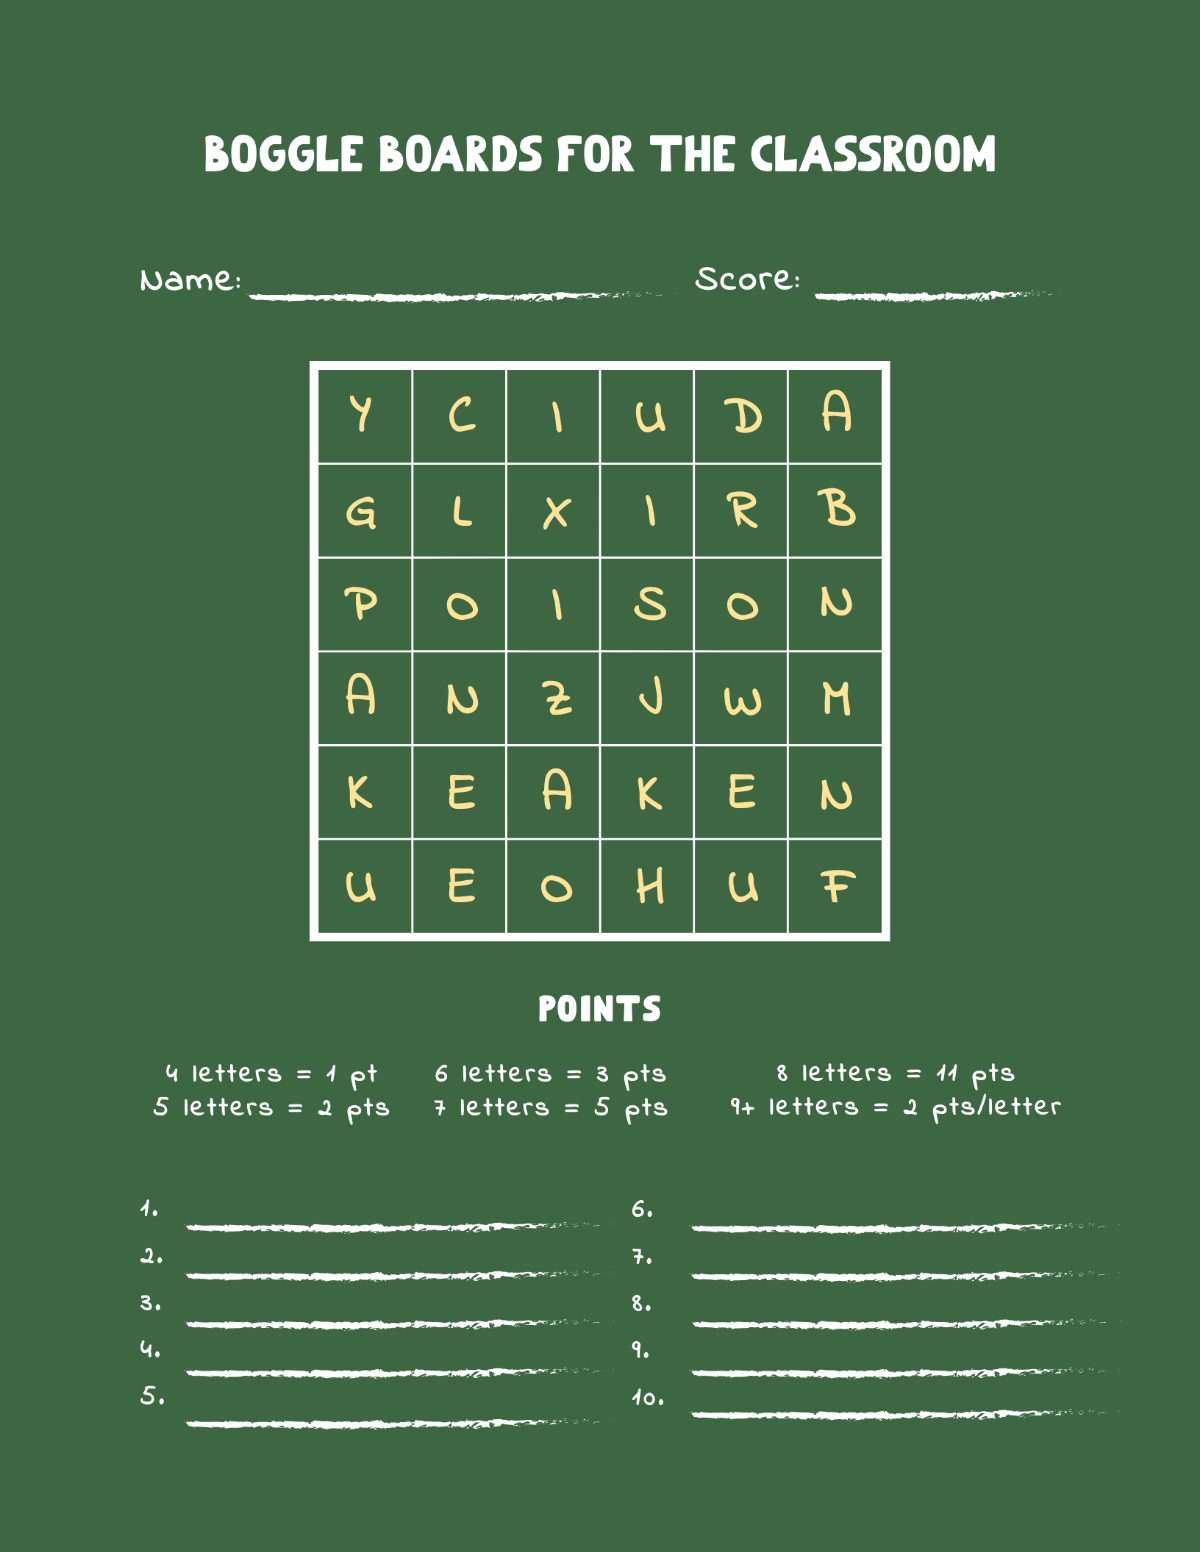 Boggle Boards For The Classroom Template